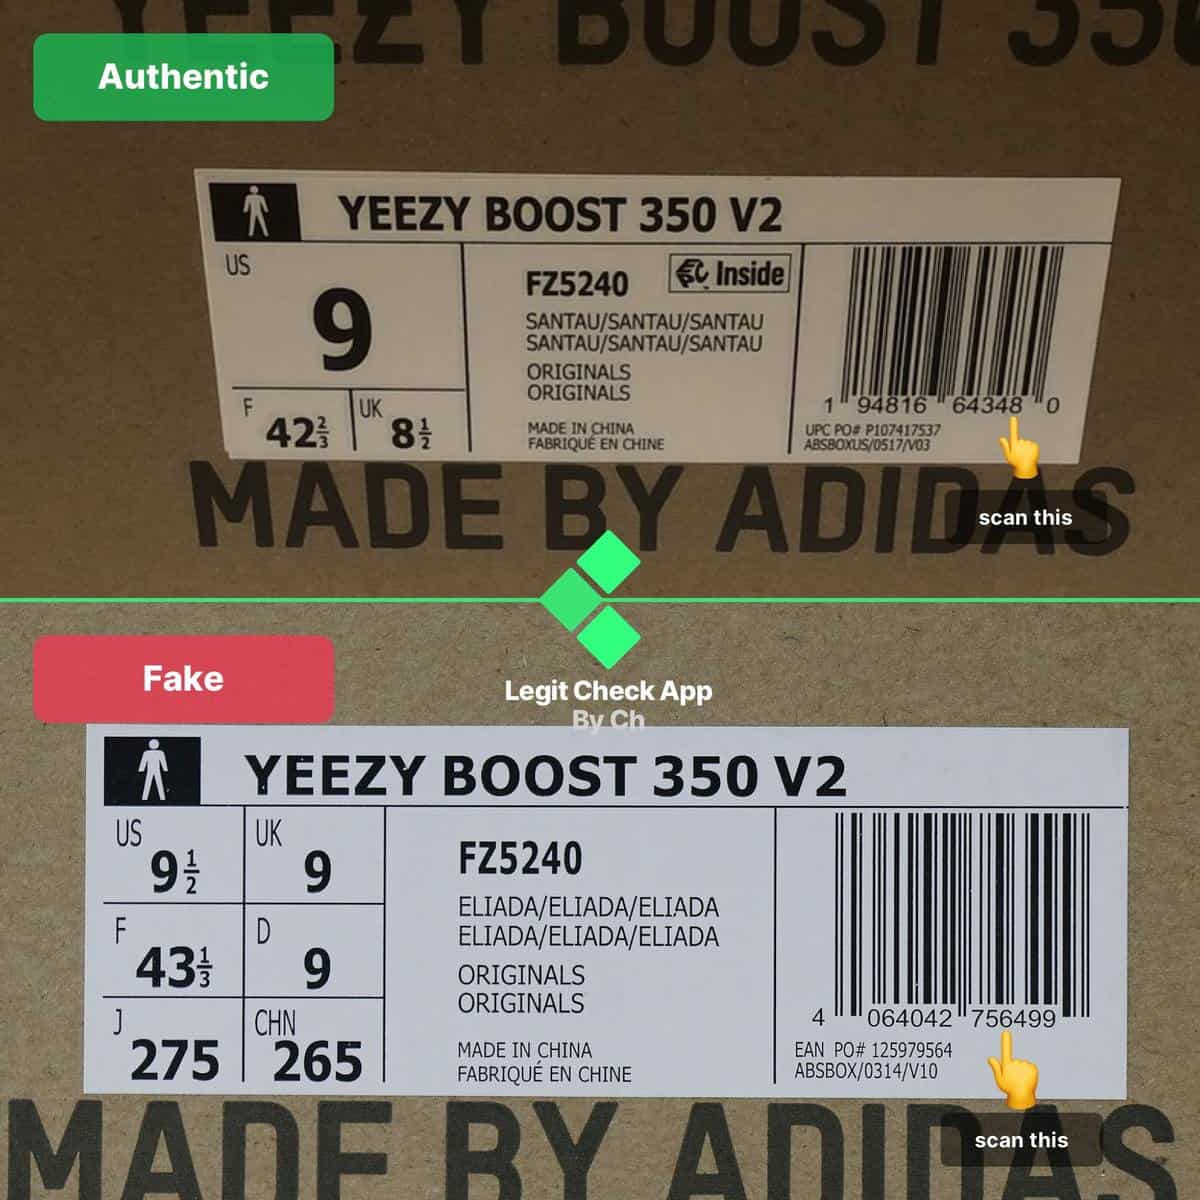 Yeezy Foam Runner Real vs Fake: 12 Differences to Look For